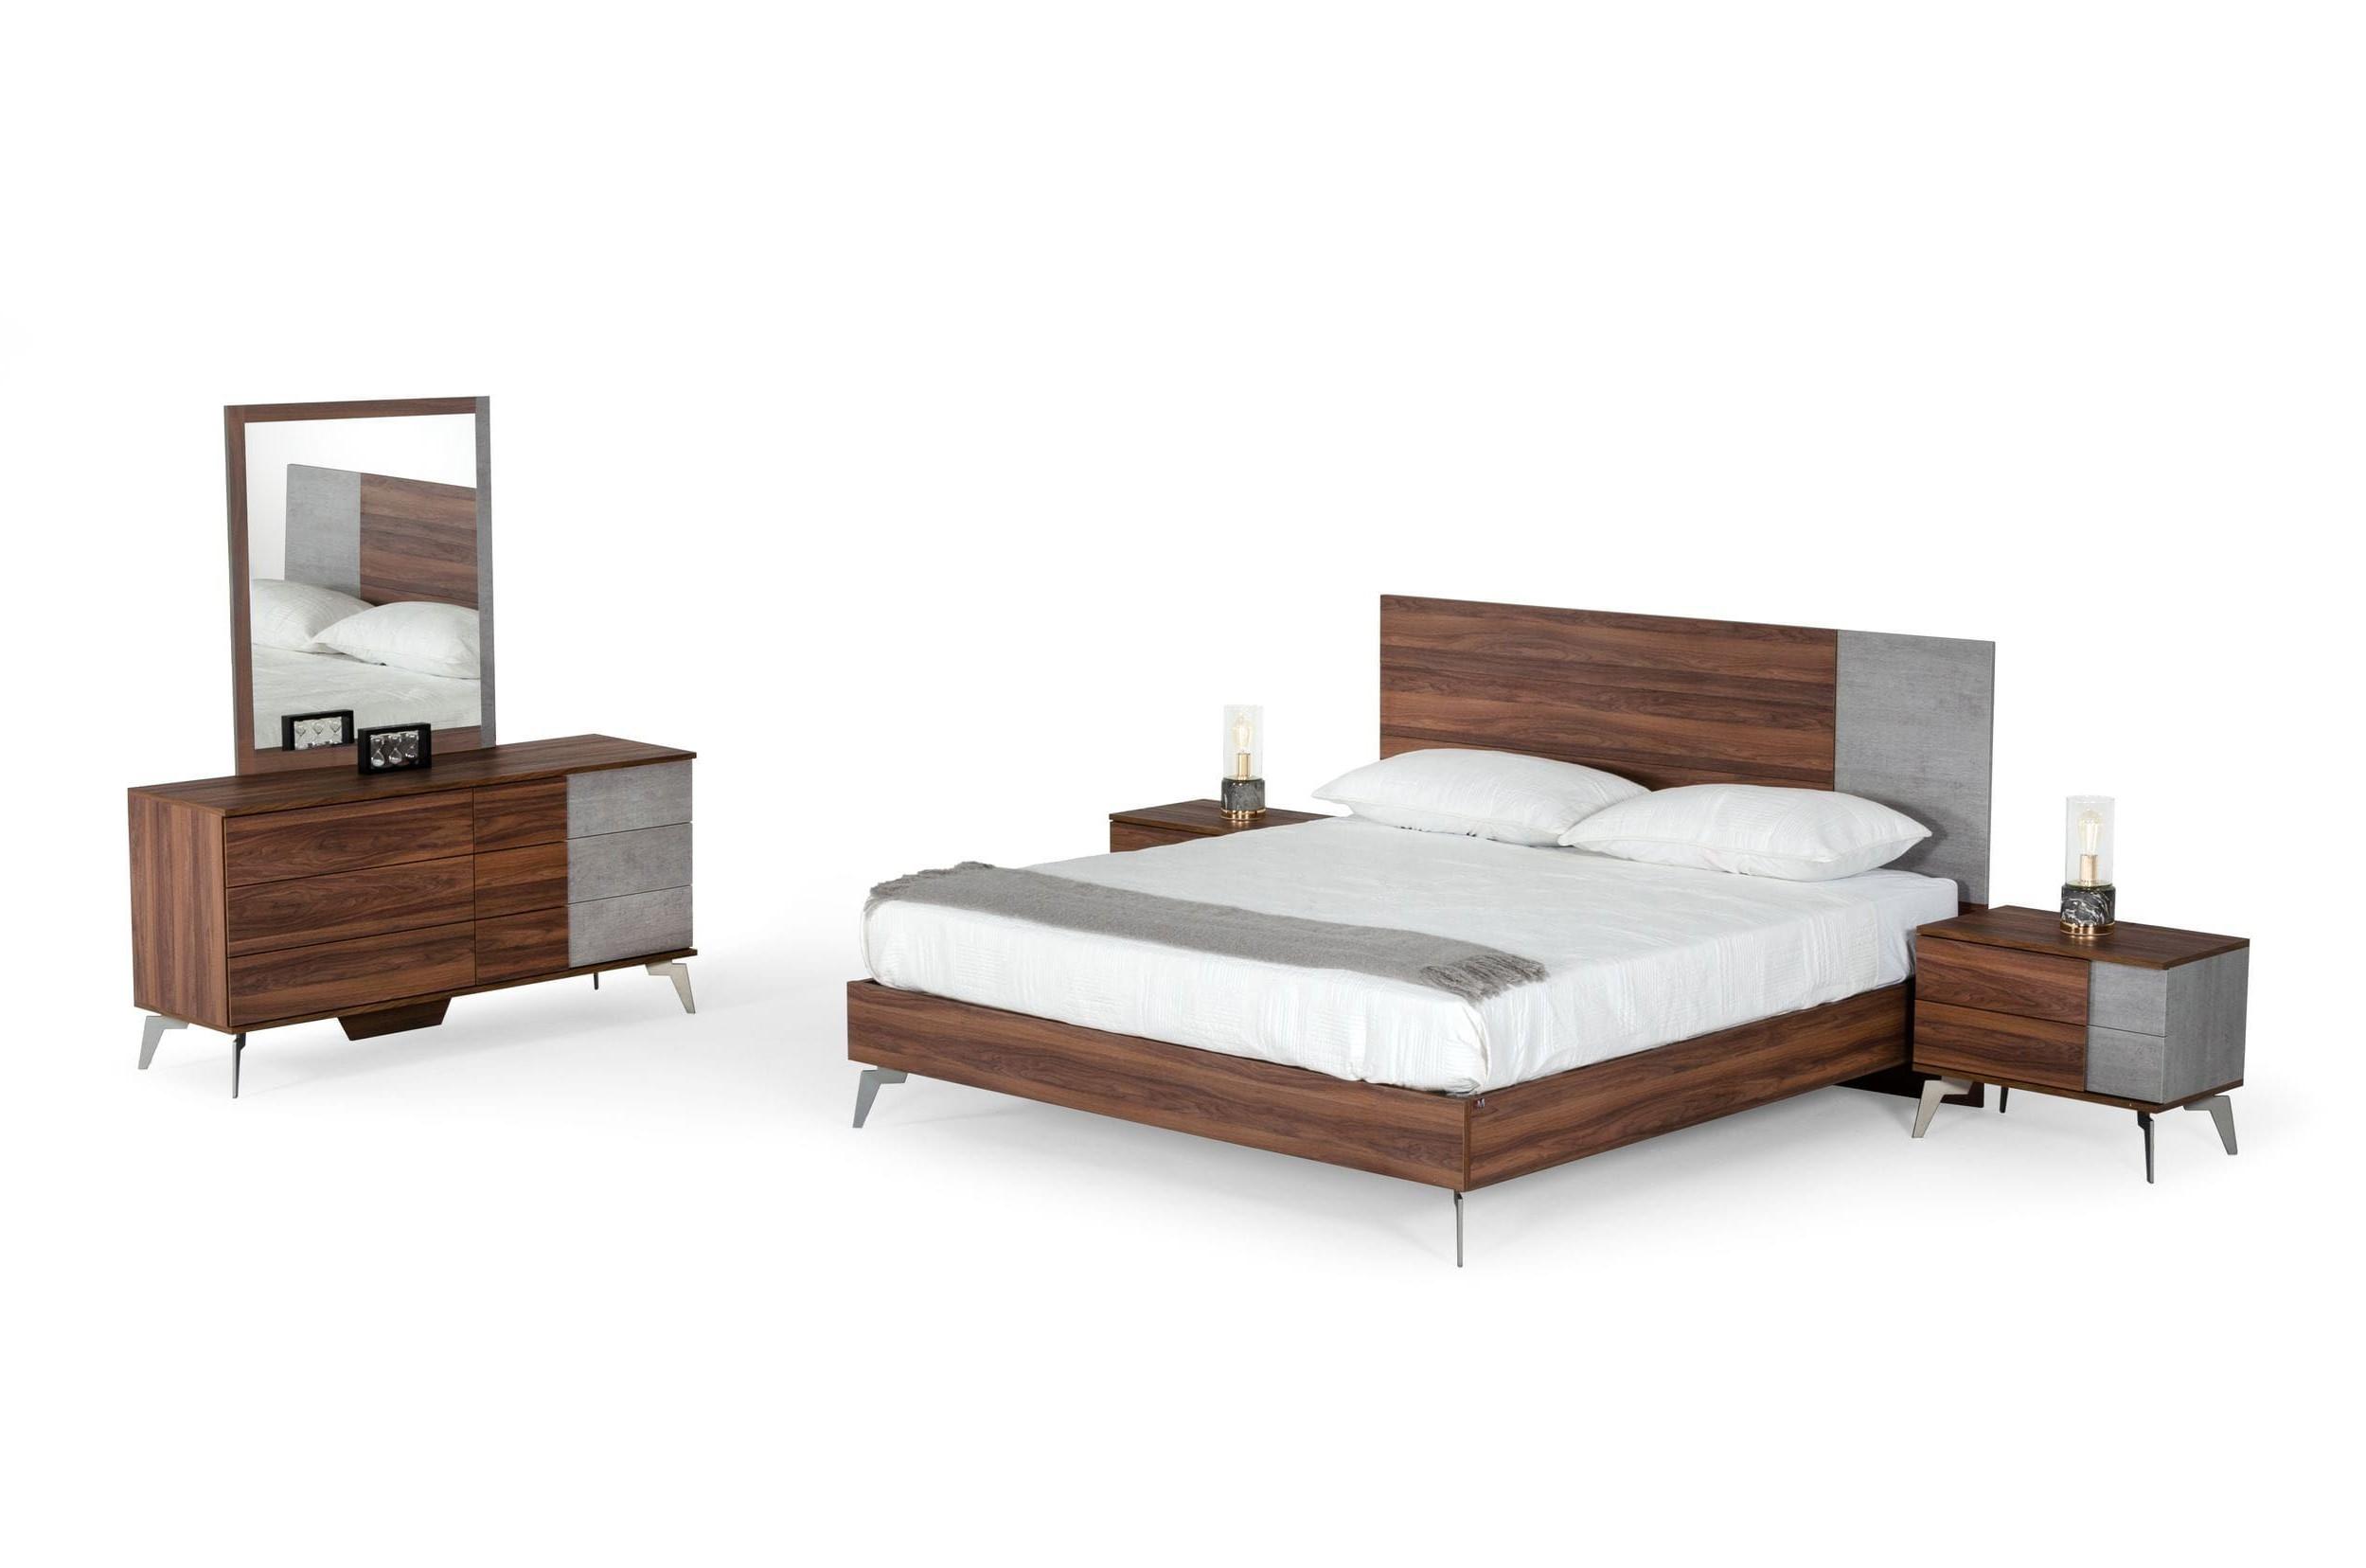 Contemporary, Modern Panel Bedroom Set Palermo VGACPALERMO-WAL-BED-Q-5pcs in Walnut 